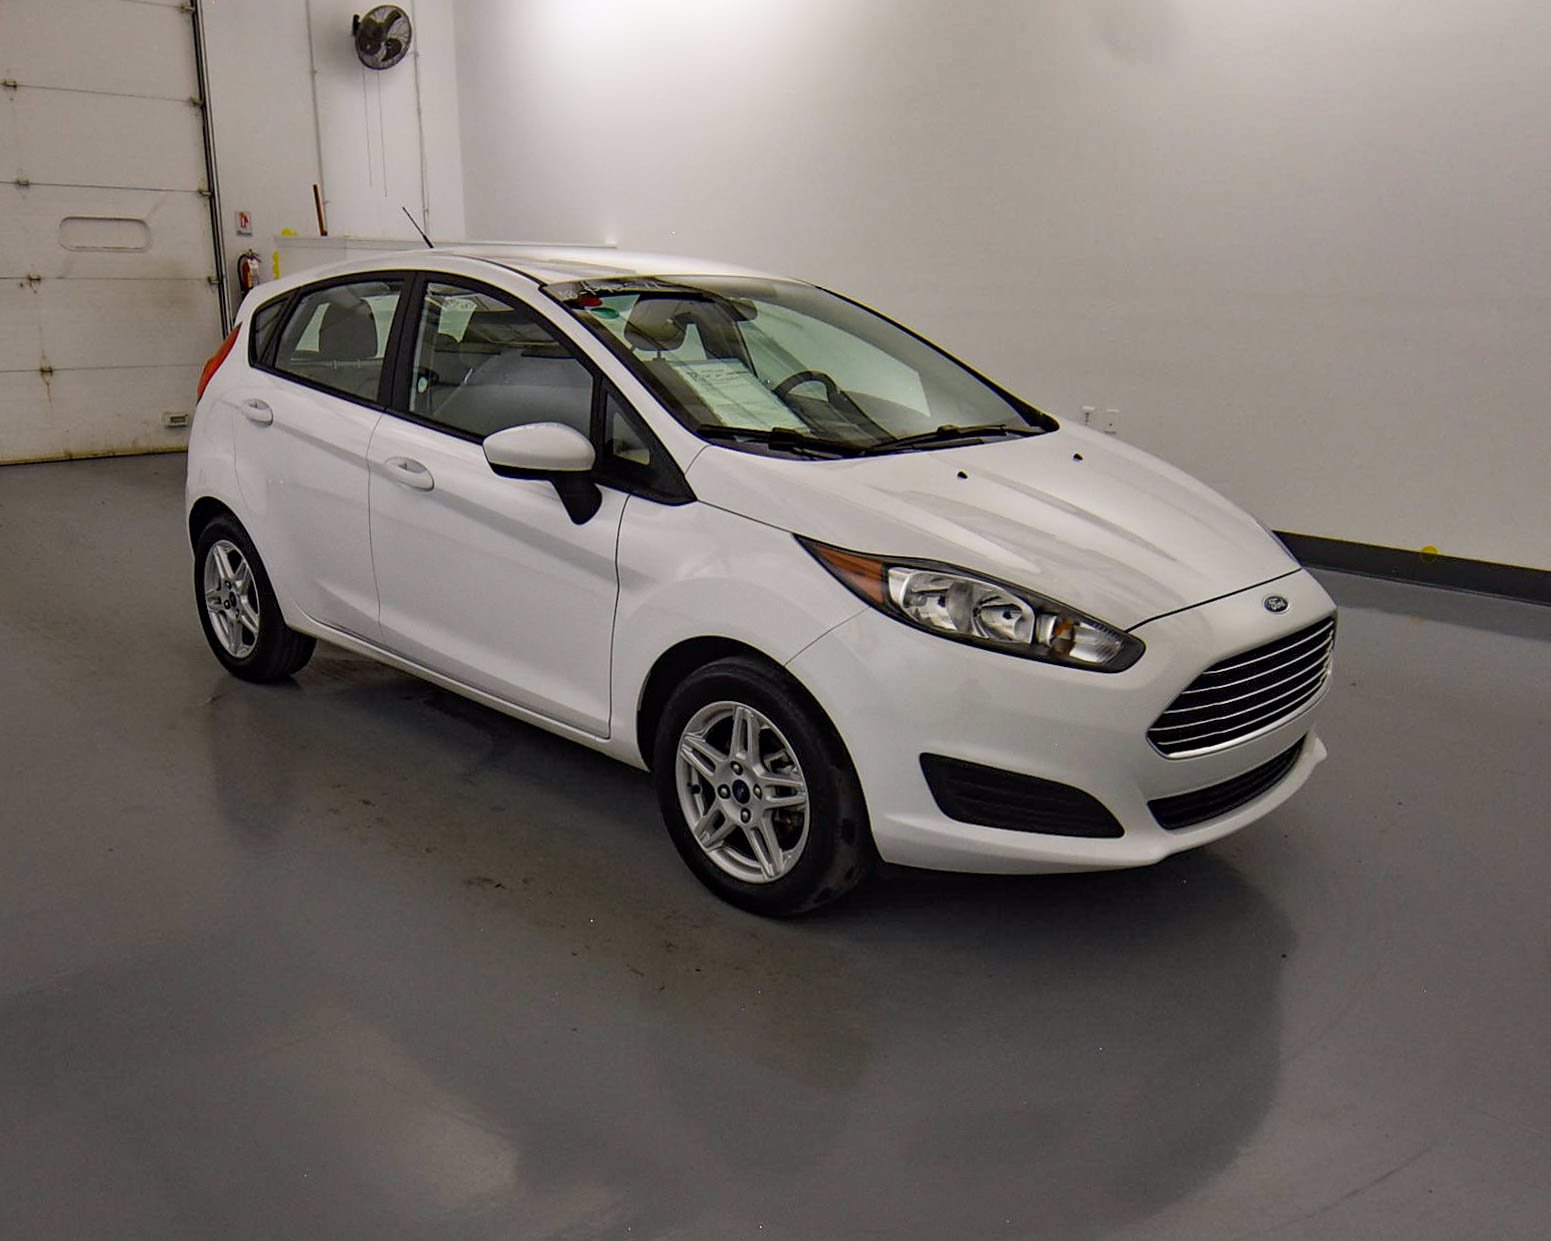 PreOwned 2018 Ford Fiesta SE FWD Hatchback